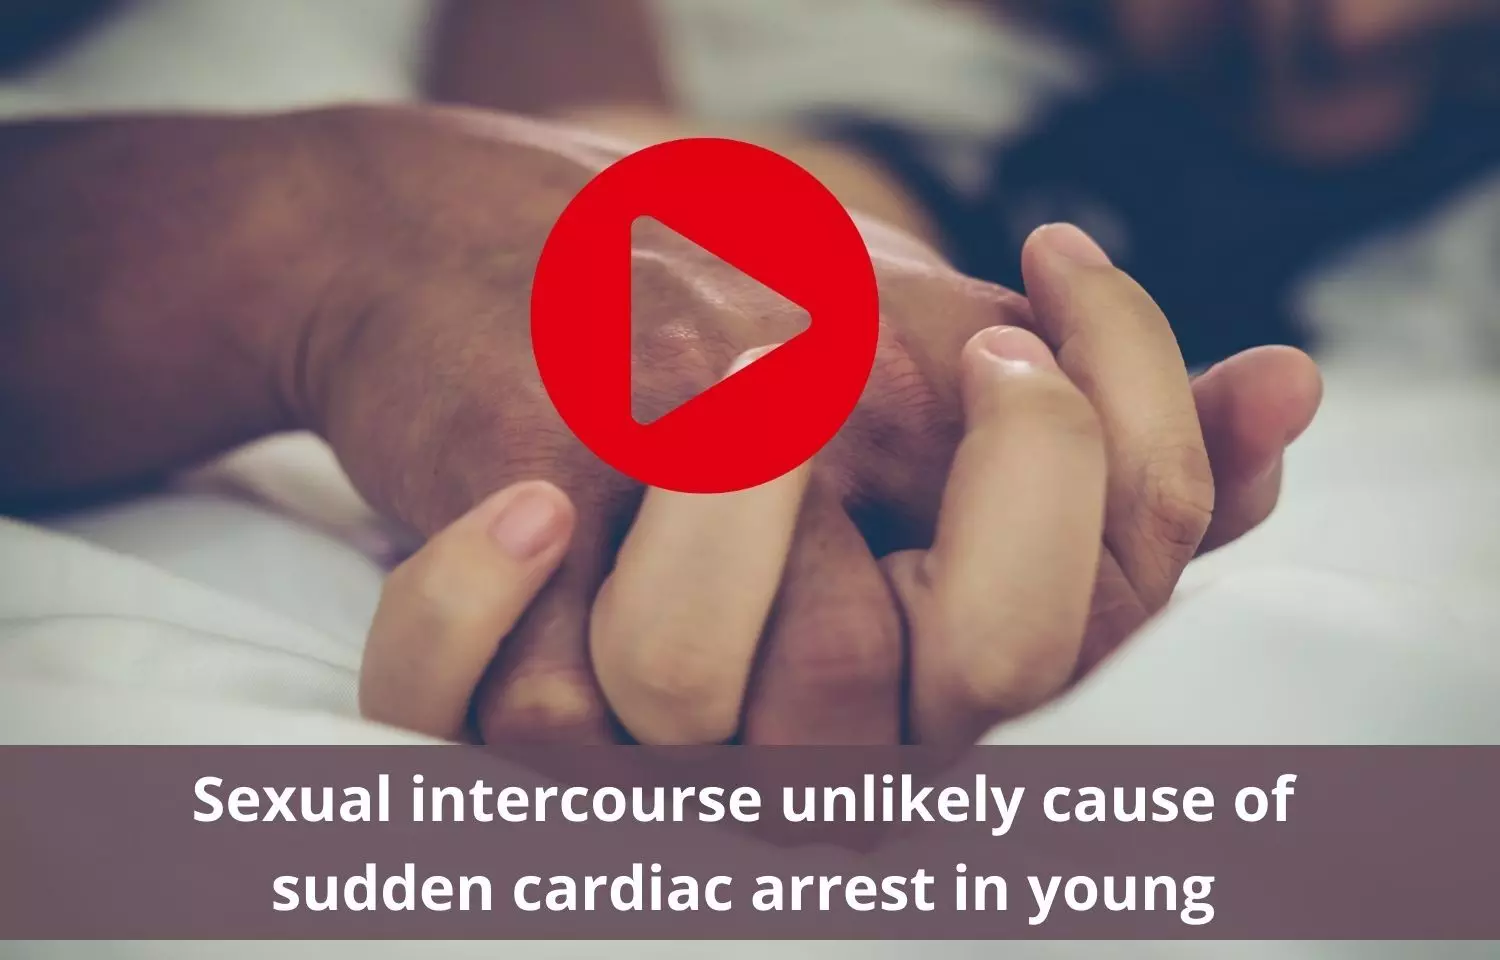 Sudden cardiac arrest due to sexual intercourse is unlikely to occur